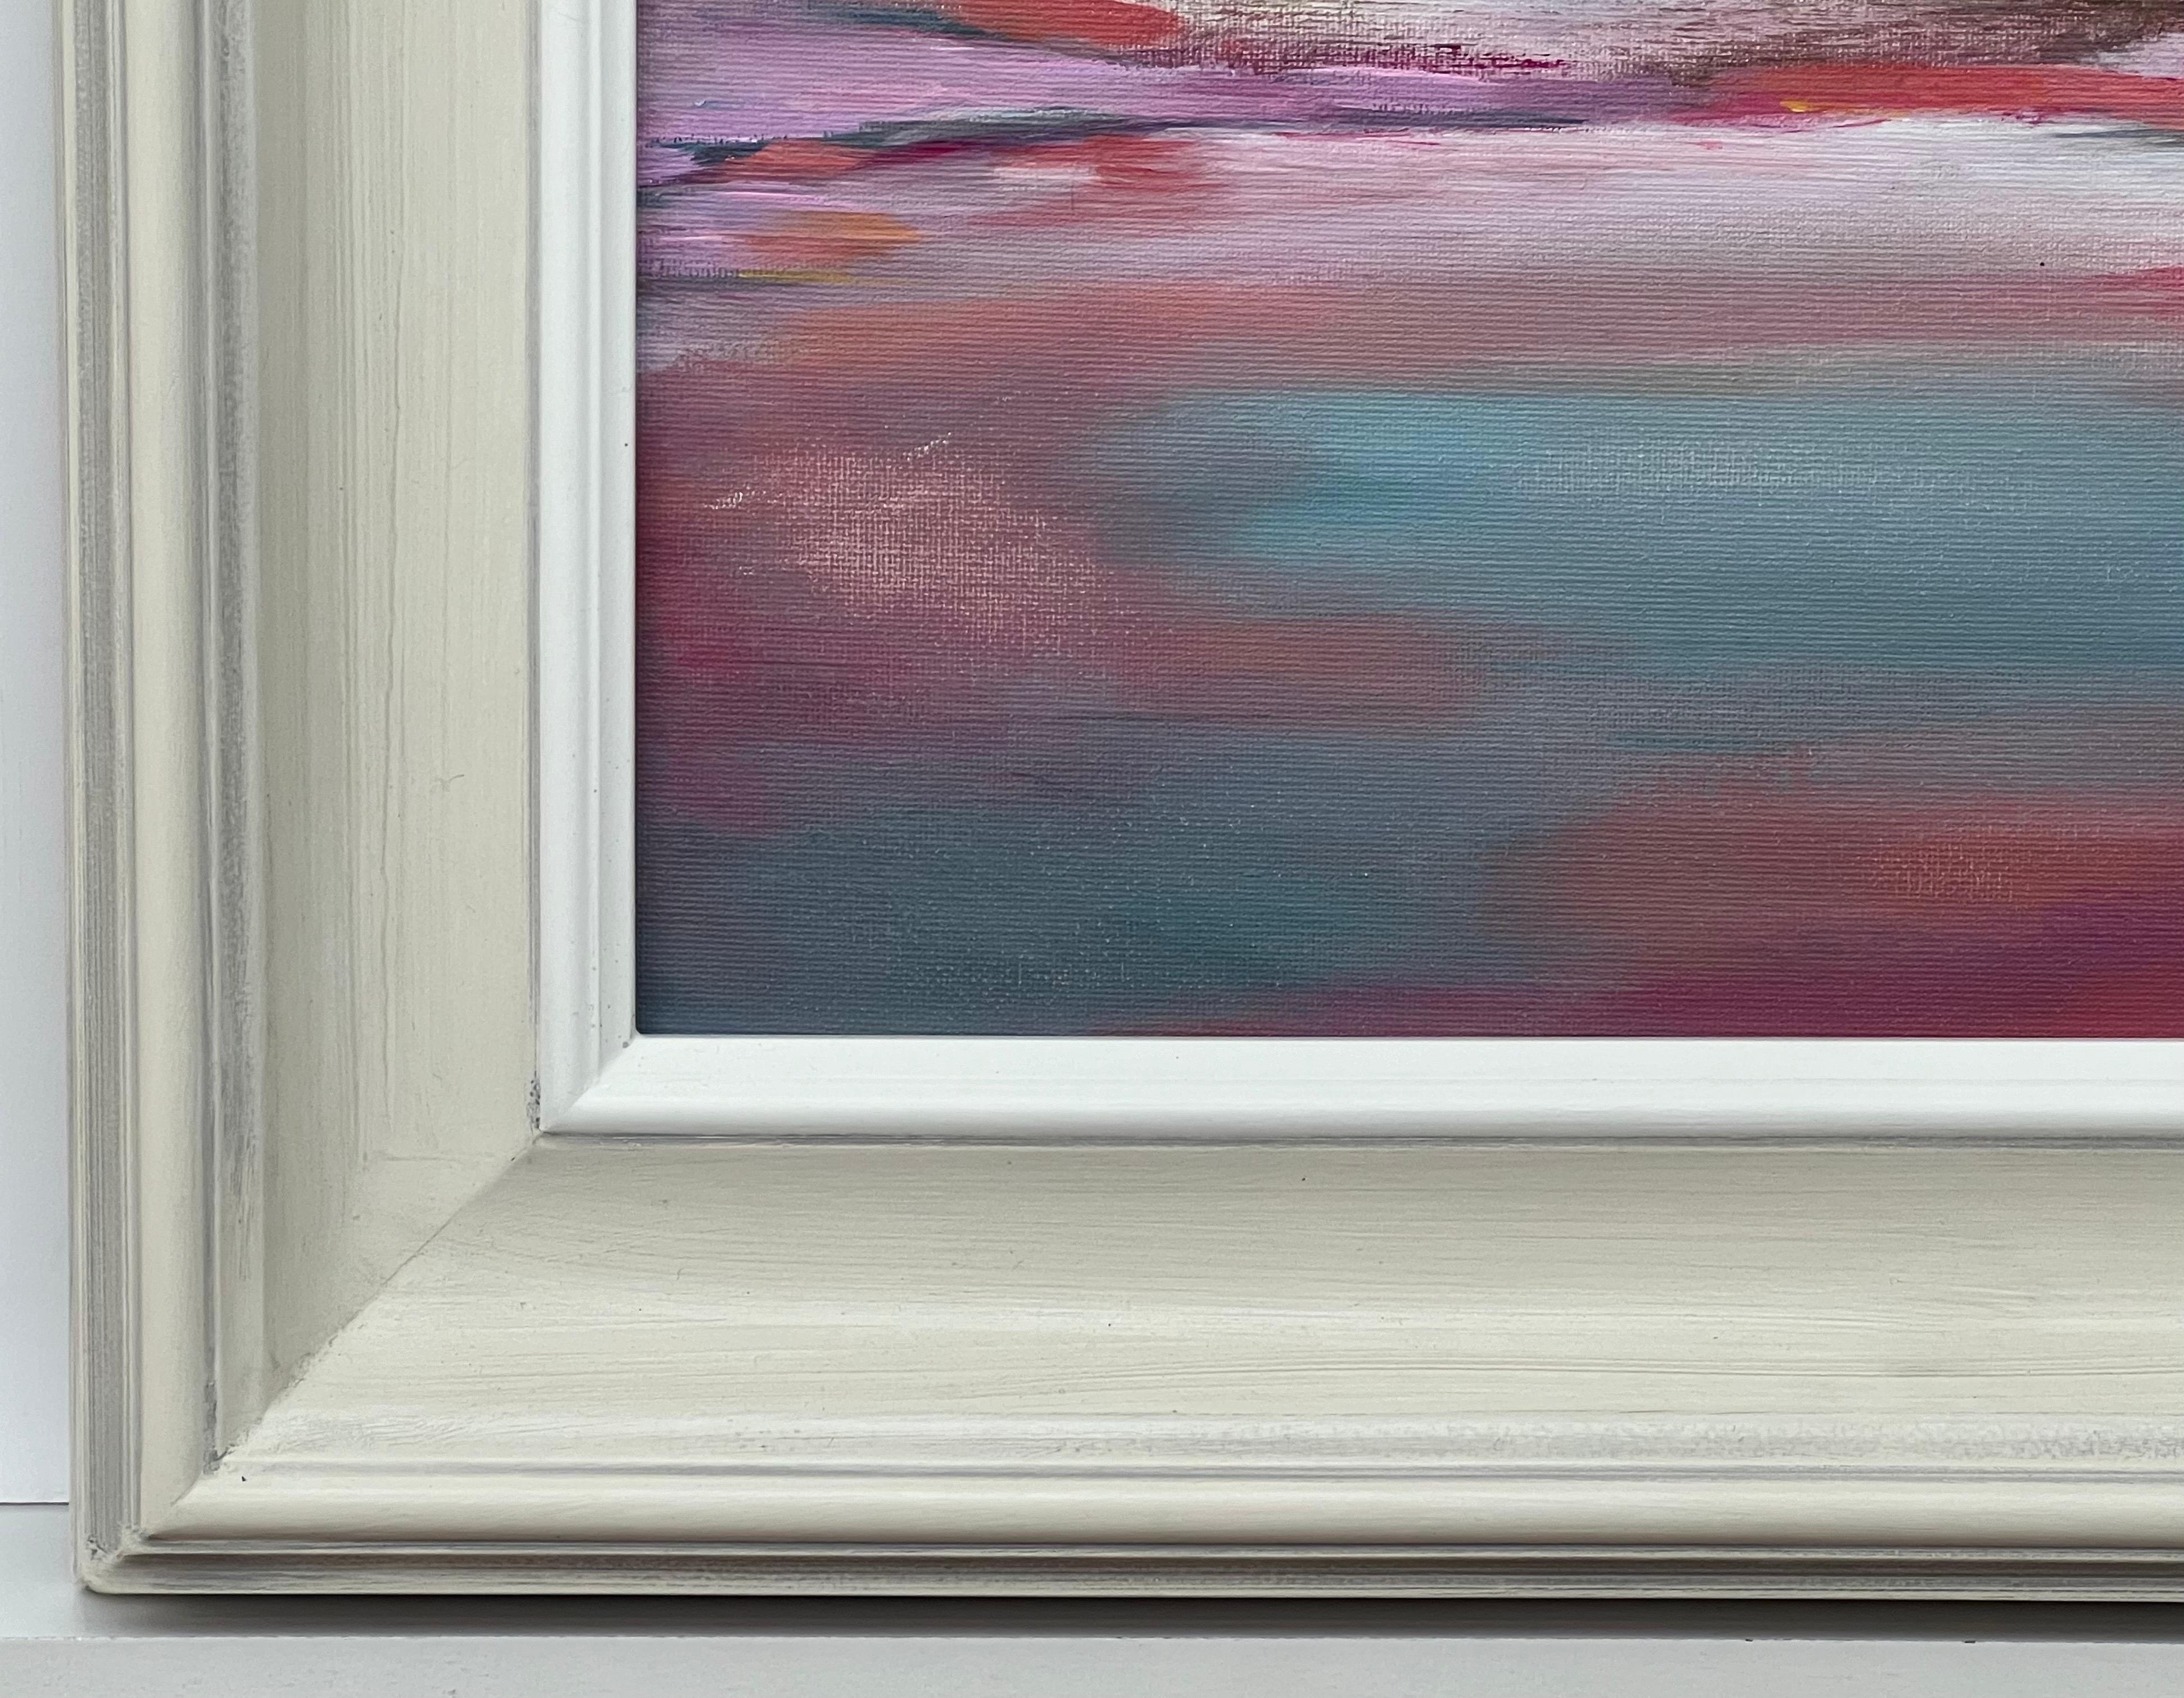 Serene and Dreamy Abstract Landscape using Pink Purple & Blue by British Artist For Sale 3